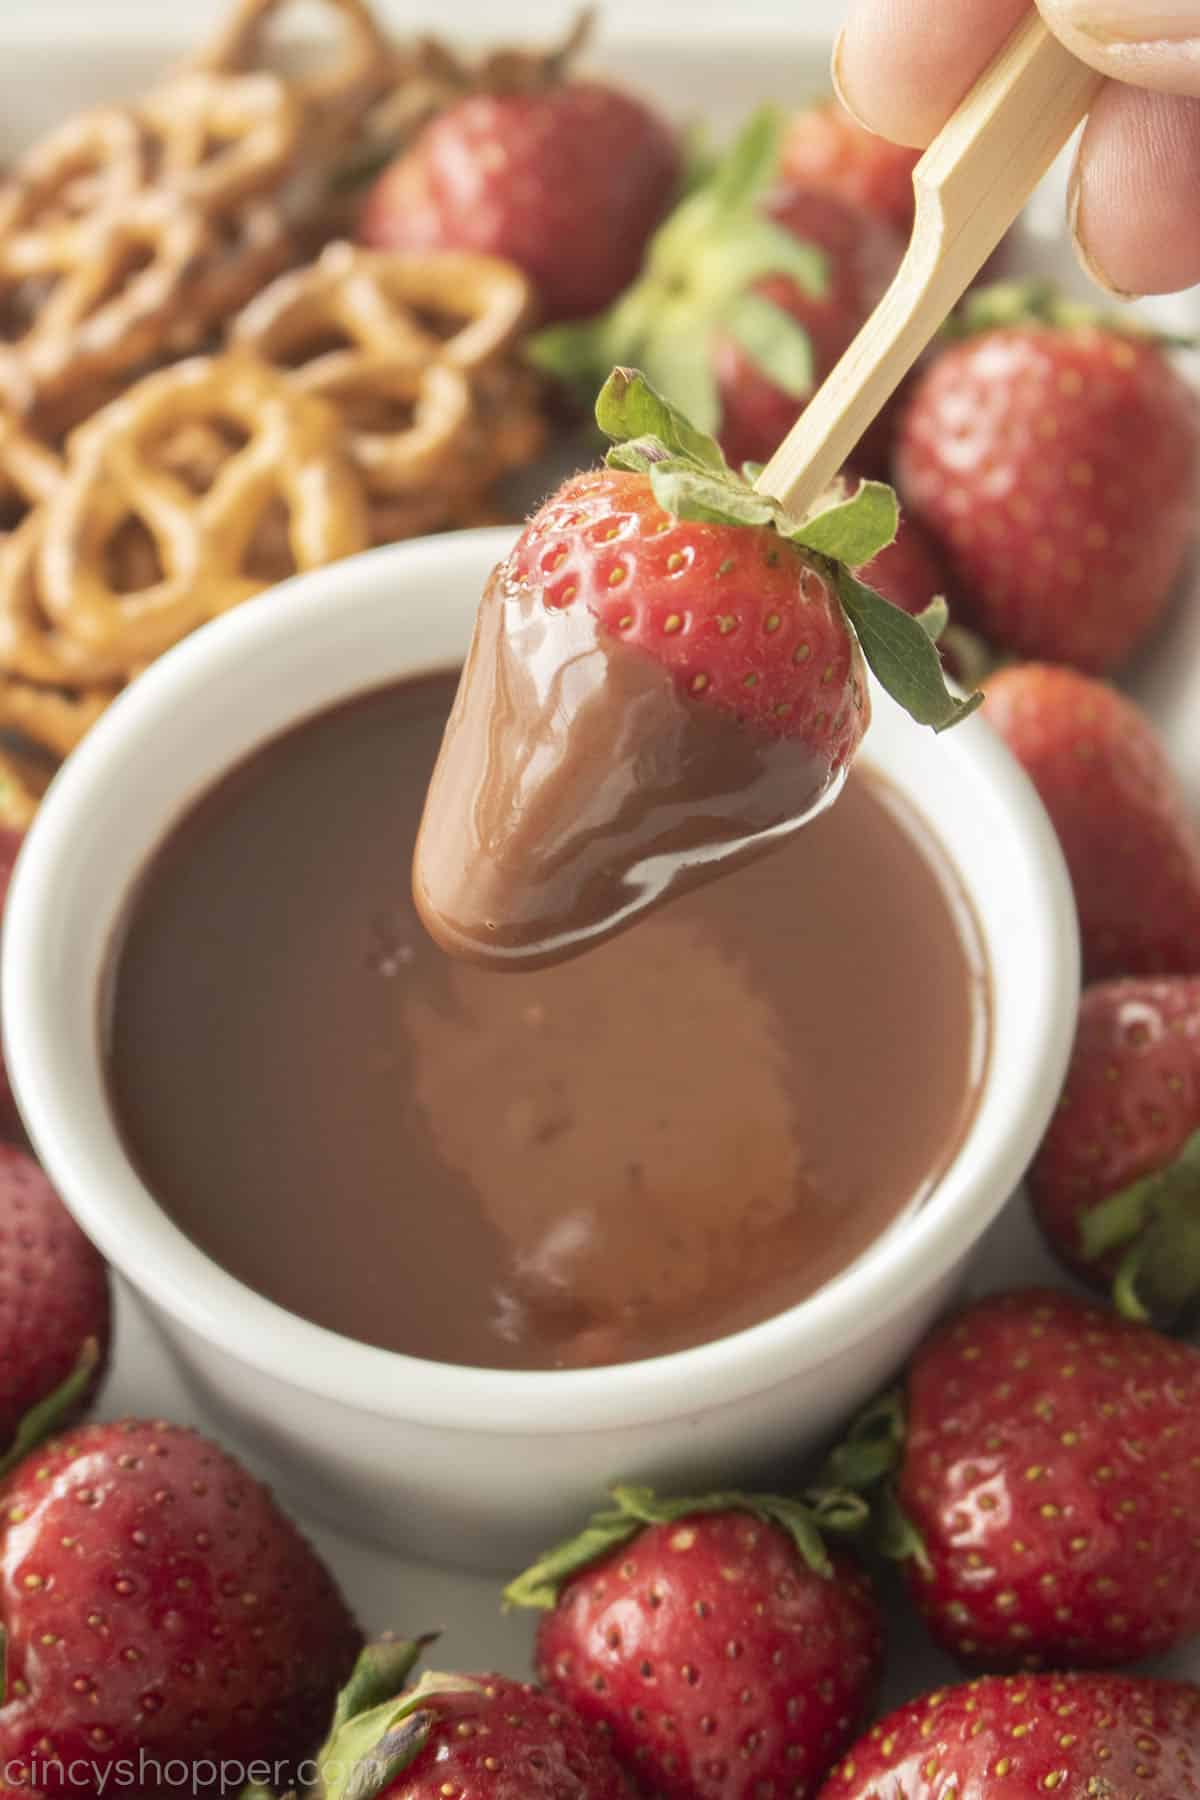 Chocolate dipping sauce on a strawberry.